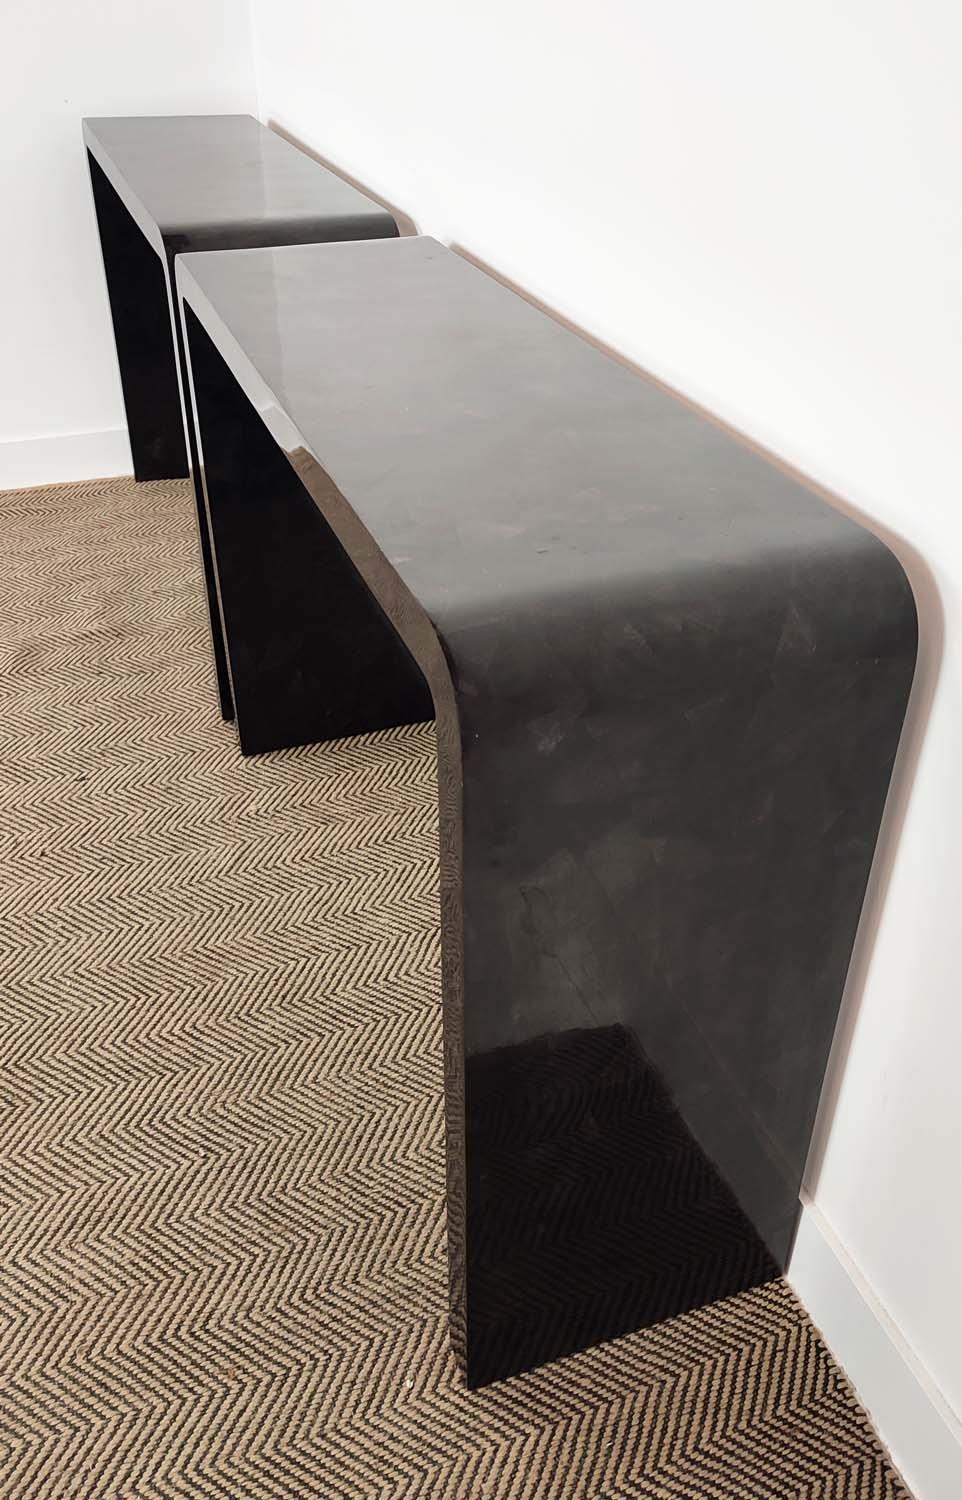 CONSOLE TABLES, a pair, black lacquered tessellated design, 83cm H x 120cm W x 35cm D. (2) - Image 3 of 5